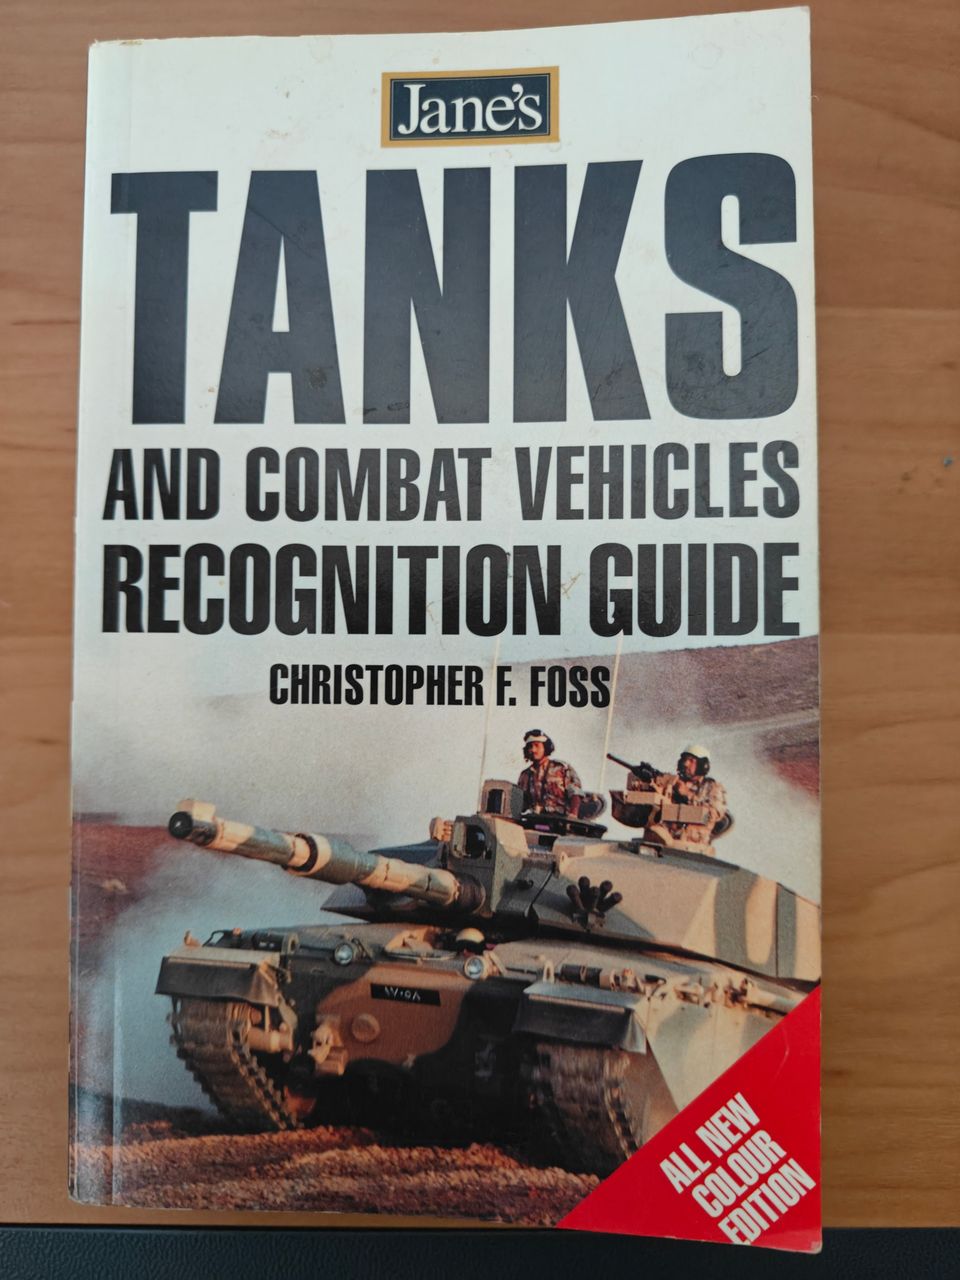 Jane's Tank Recognition Guide